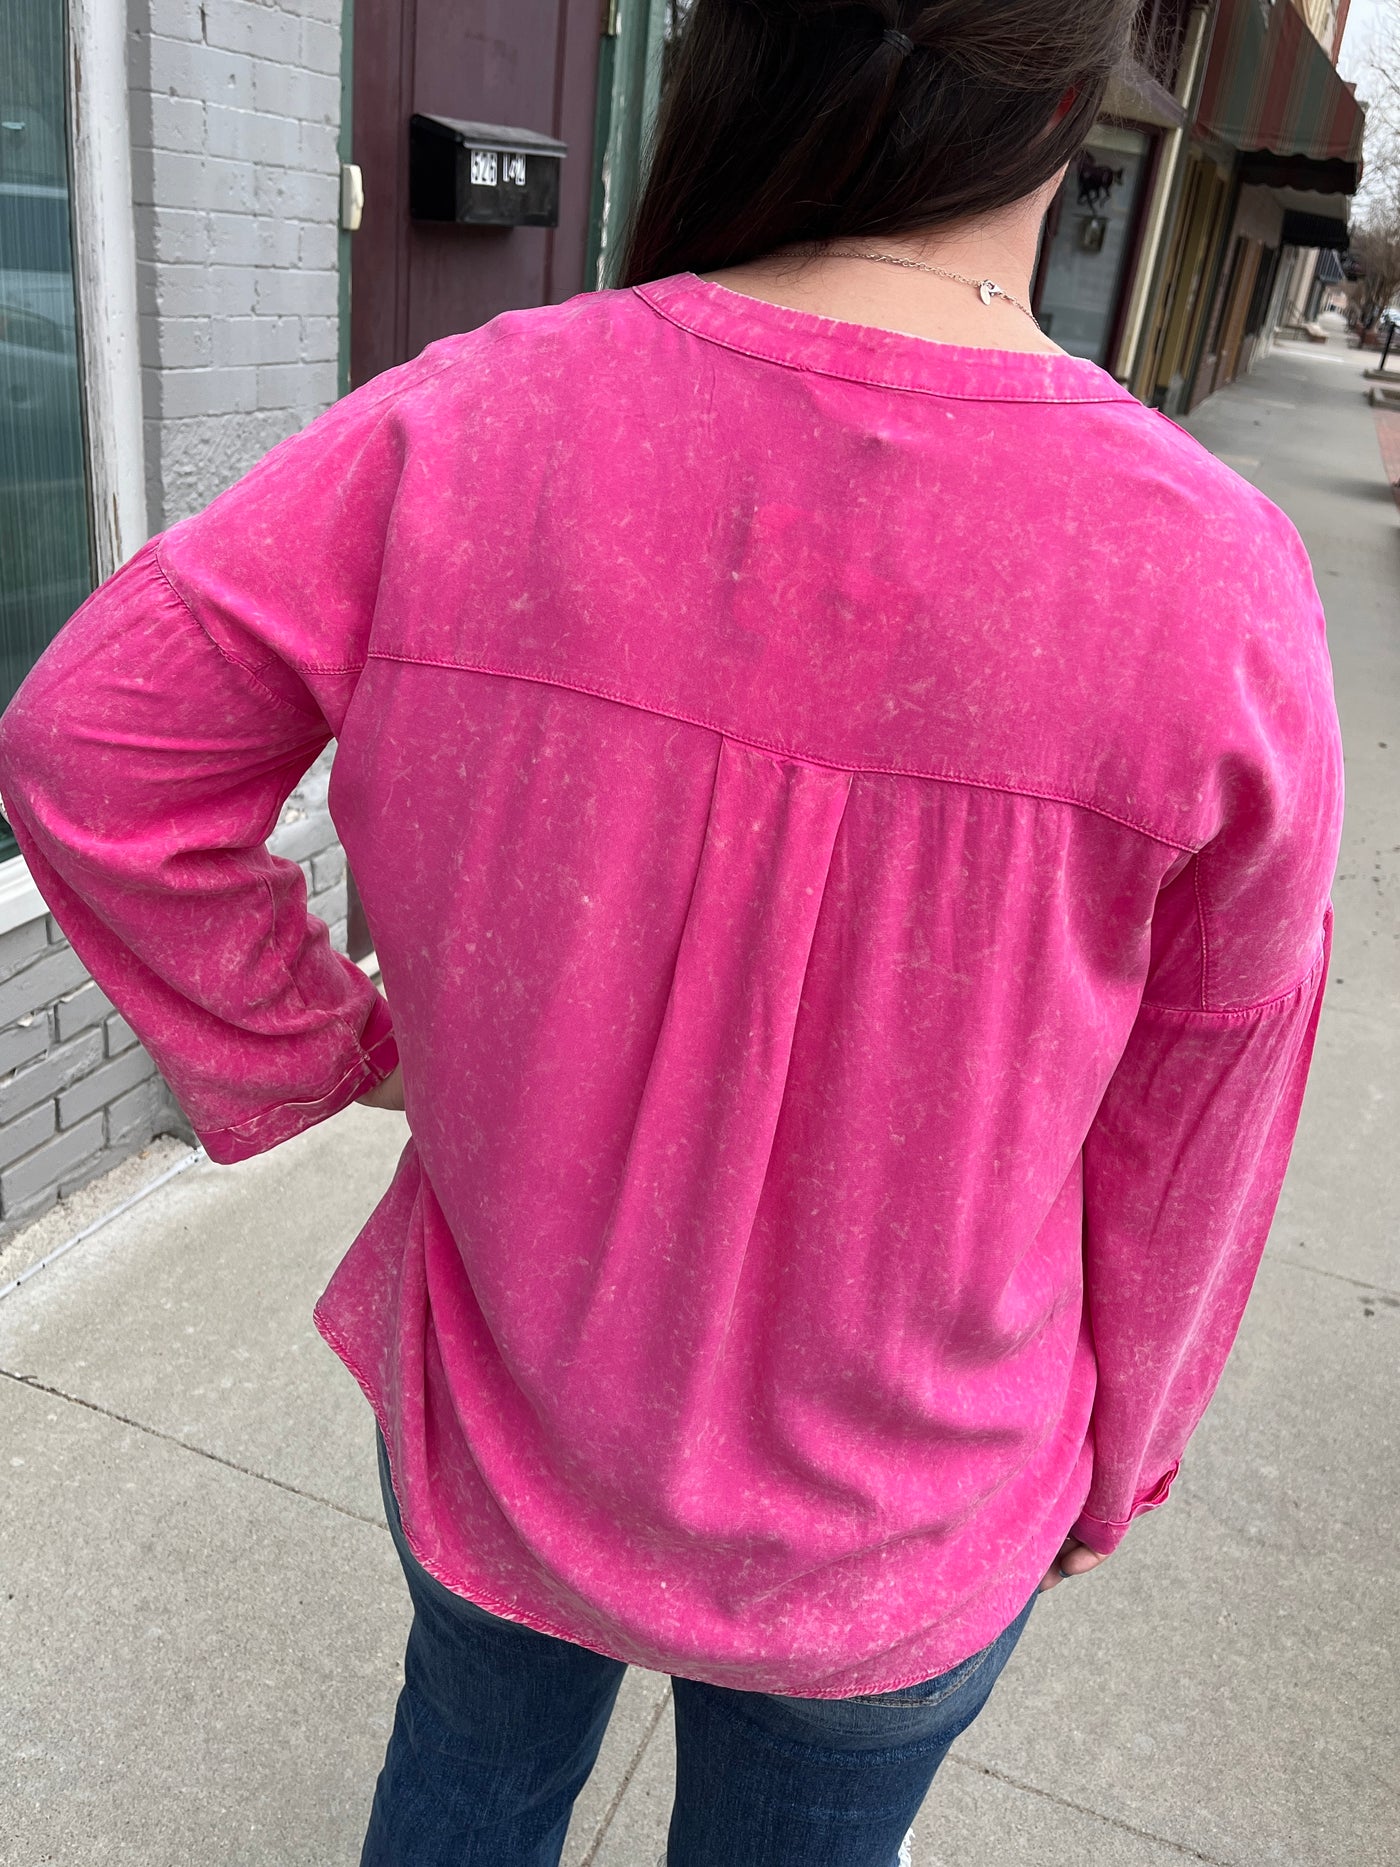 Mineral Wash Pink Top